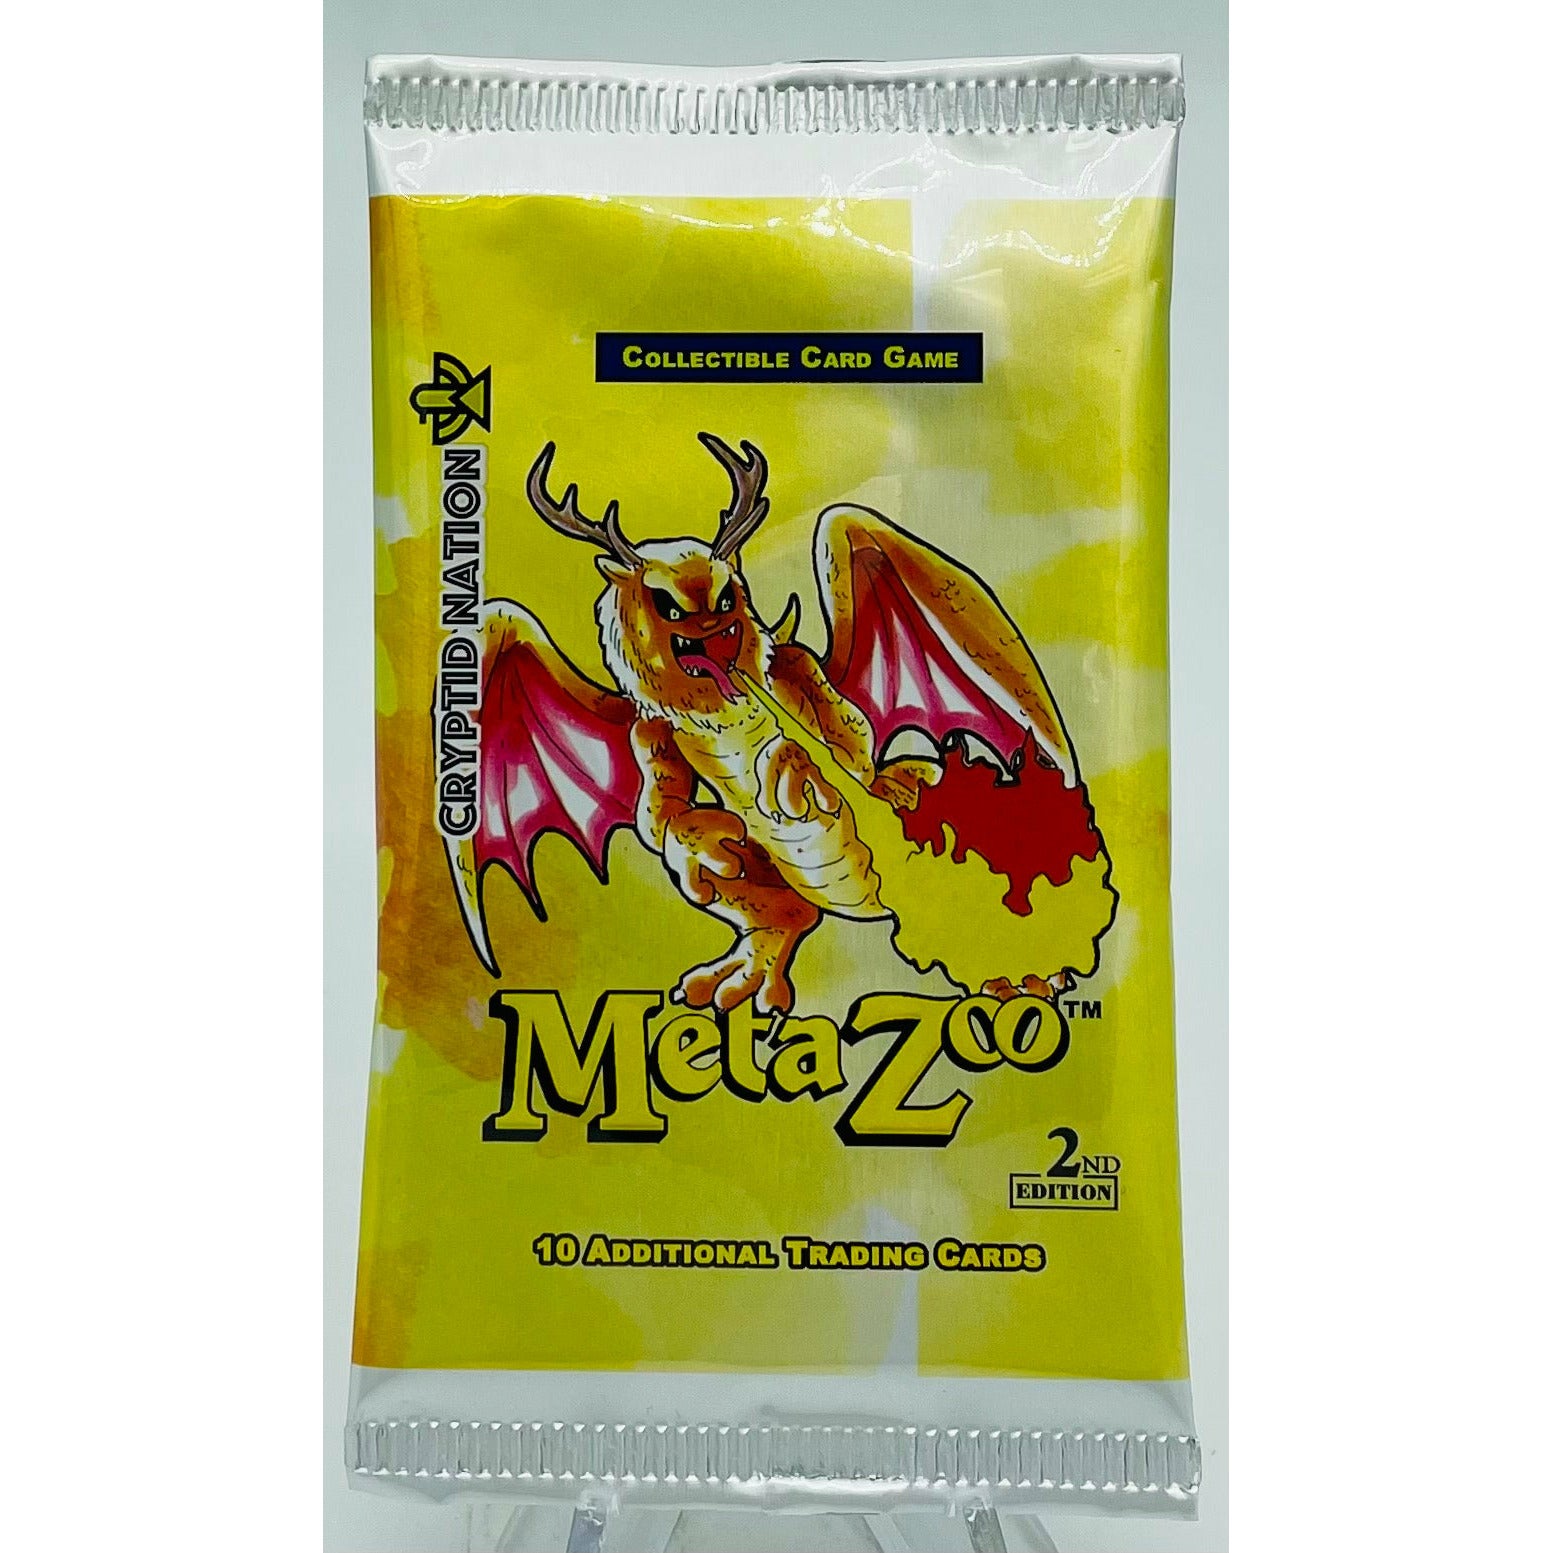 Metazoo Cryptid Nation 2nd Edition Booster Pack 10 Trading Cards Sealed